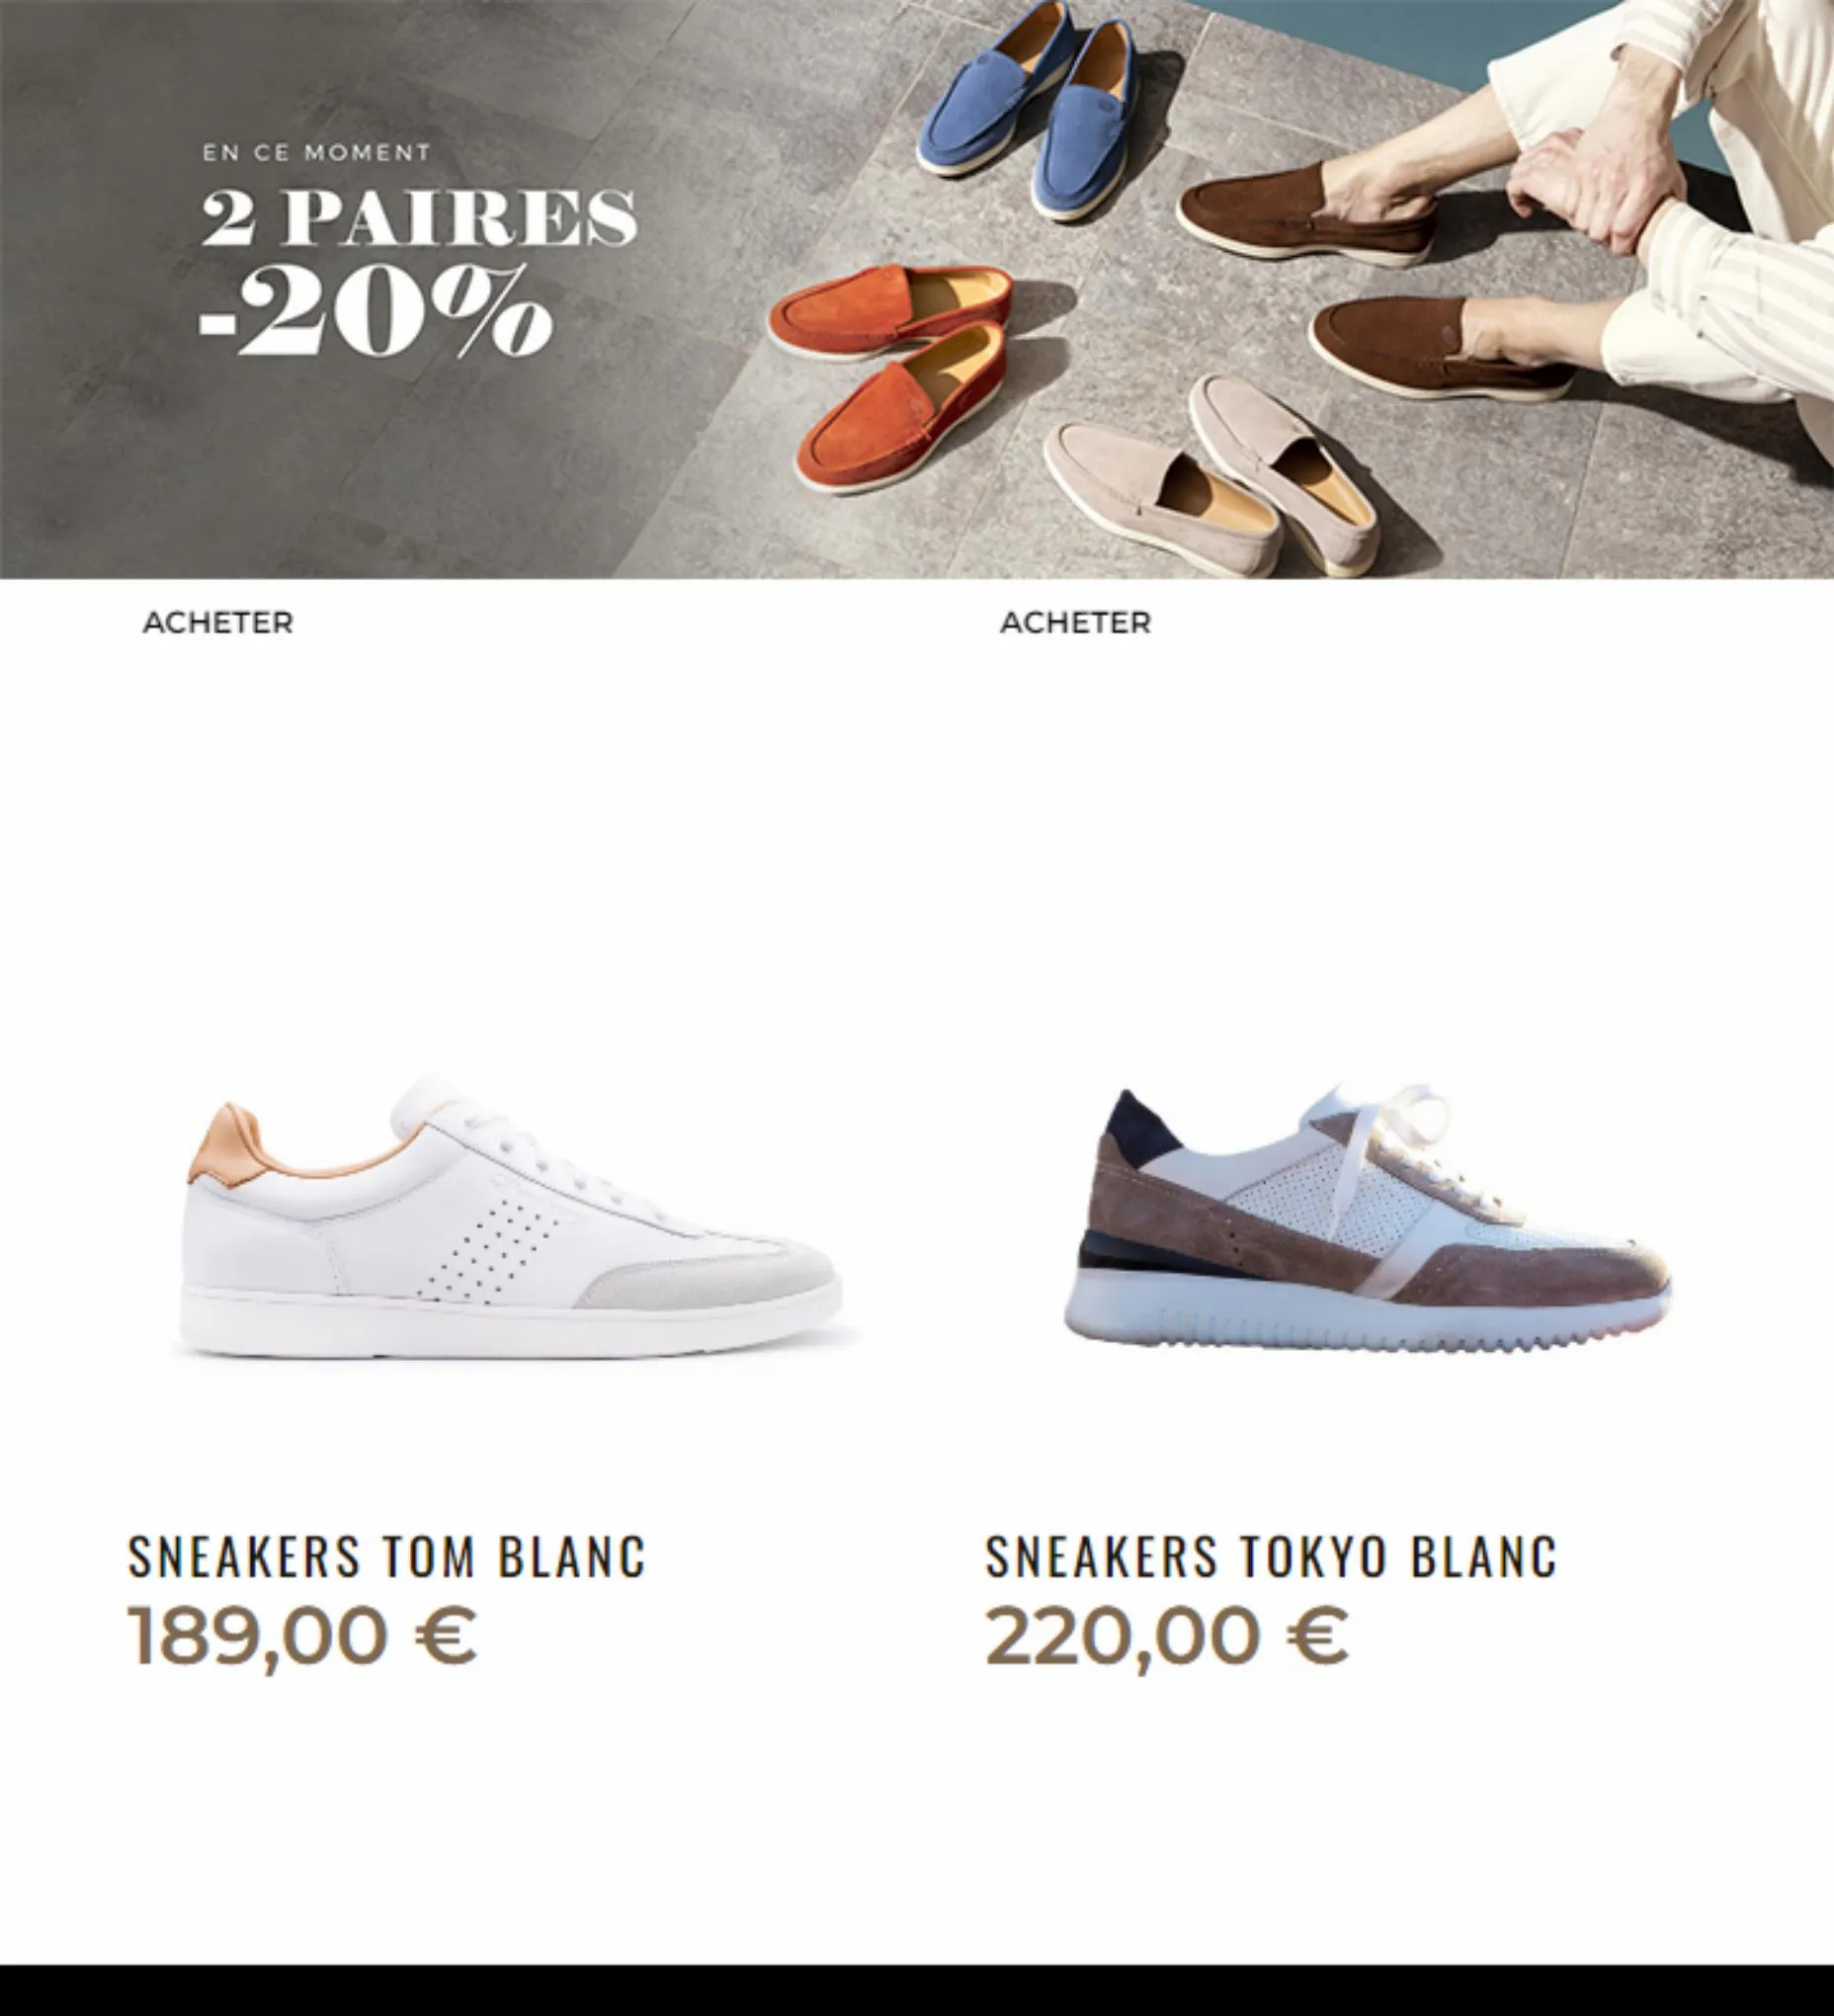 Catalogue 2 Paires -20%, page 00005